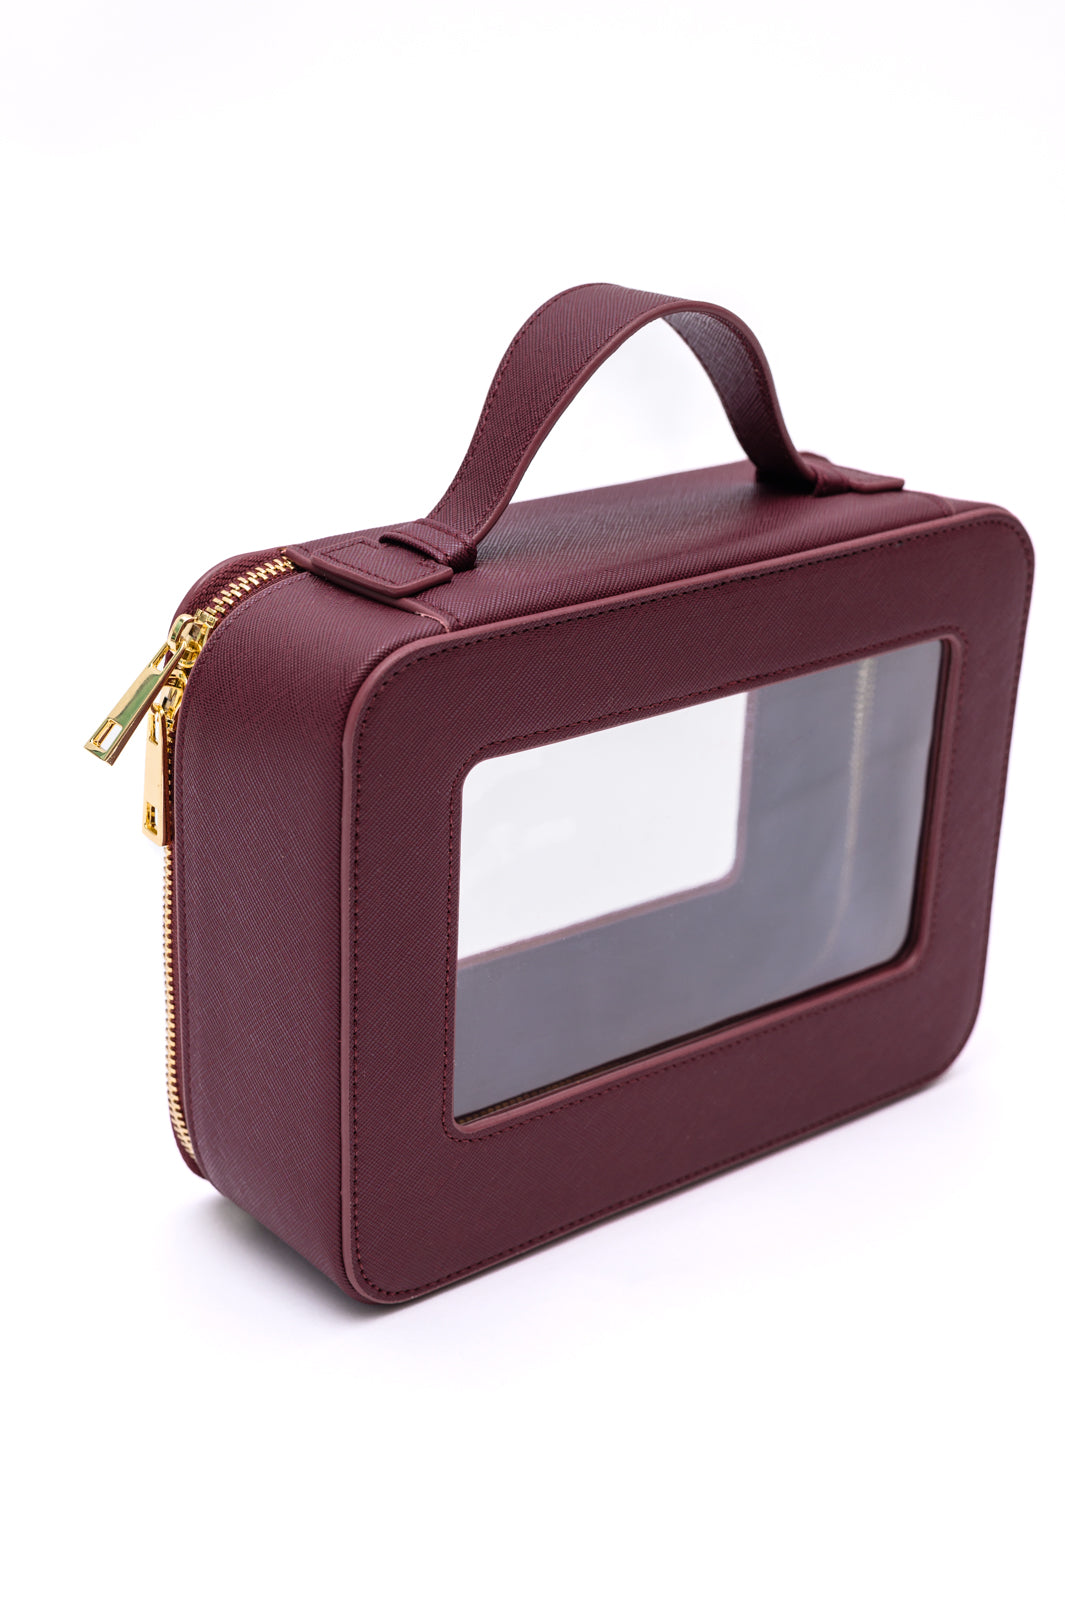 PU Leather Travel Cosmetic Case in Wine Ave Shops